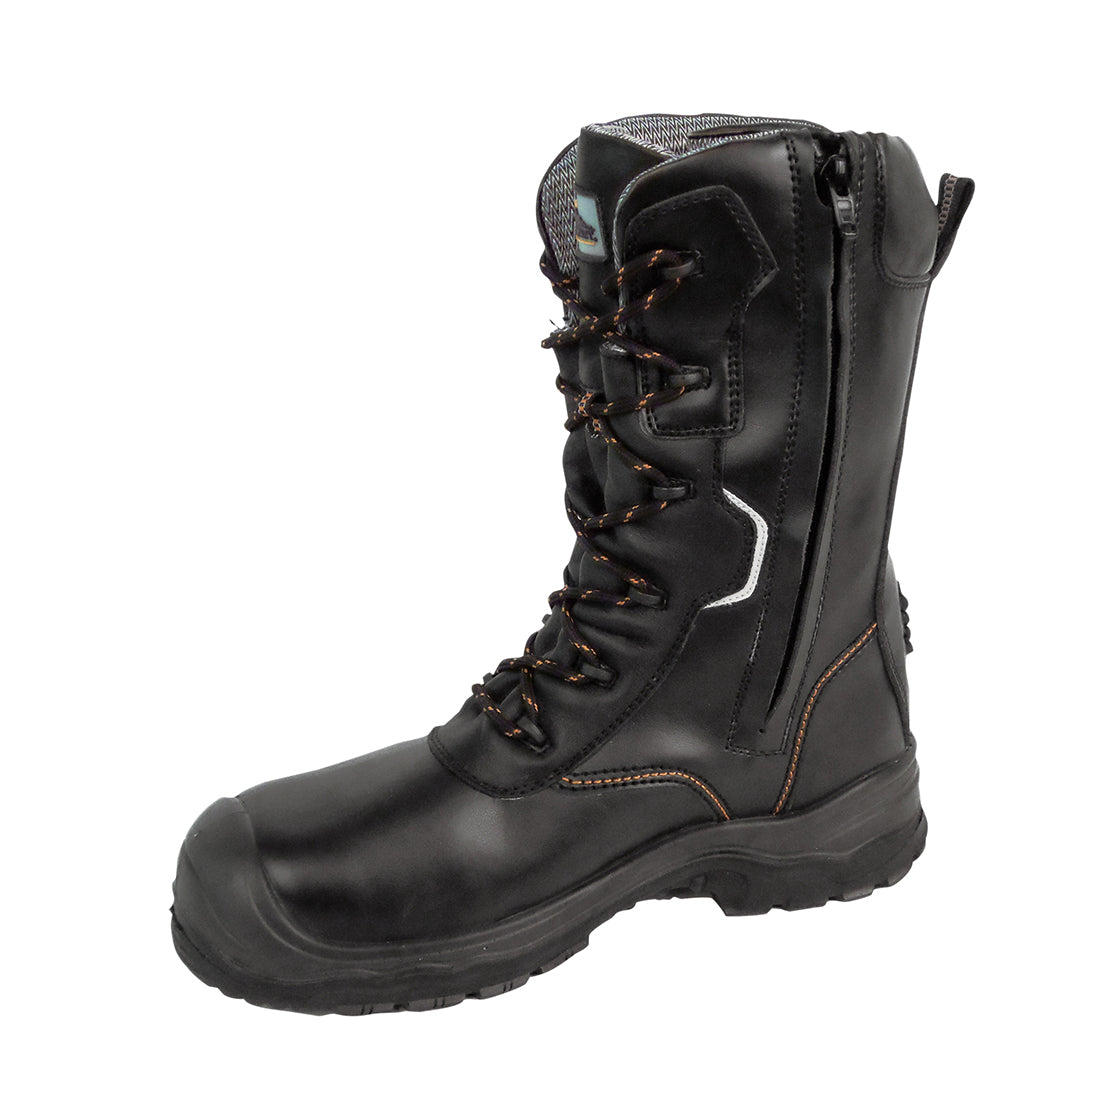 Portwest Compositelite Traction 10 inch Safety Boot